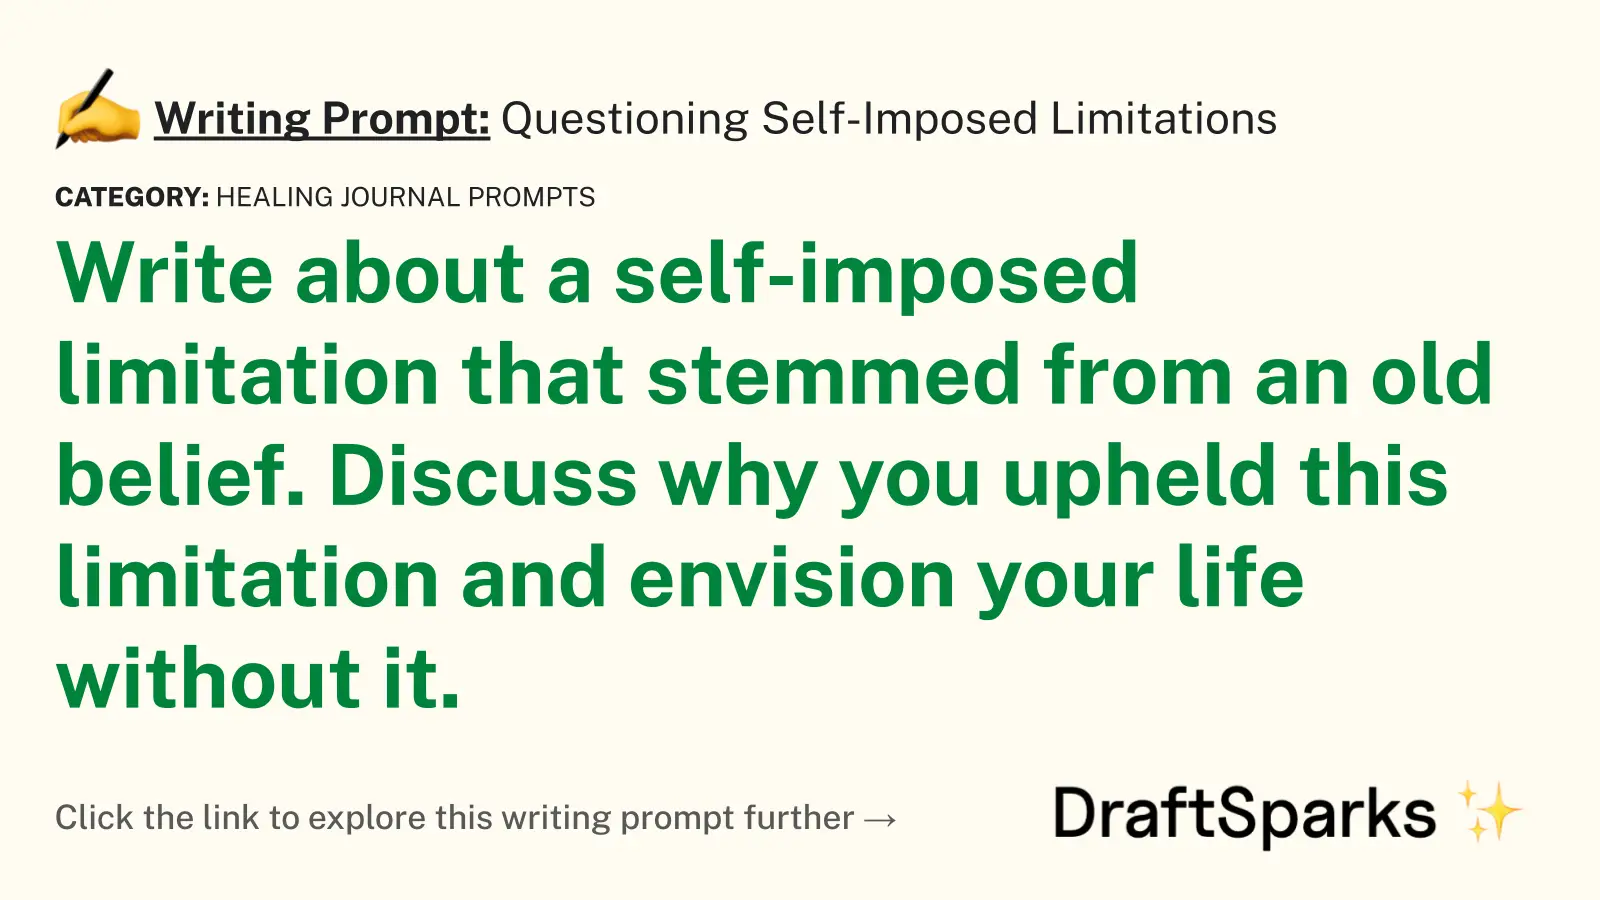 Questioning Self-Imposed Limitations